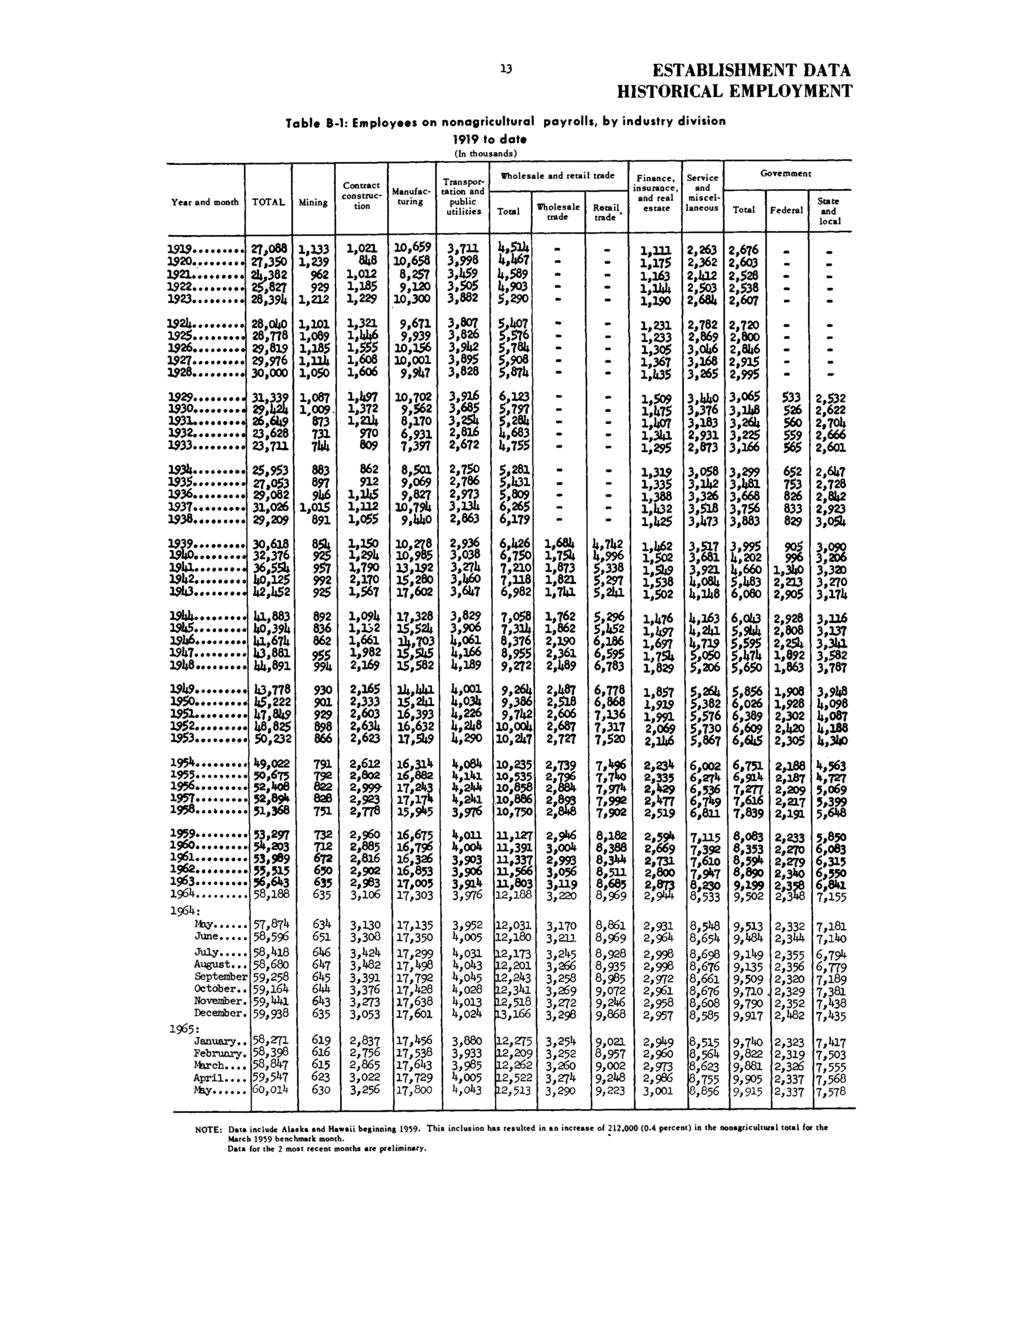 ESTABLISHMENT DATA HISTORICAL EMPLOYMENT Table B-l: Employees on nonagricultural payrolls, by industry division 1919 to date (In thousands) Year and month TOTAL Mining Contract construction